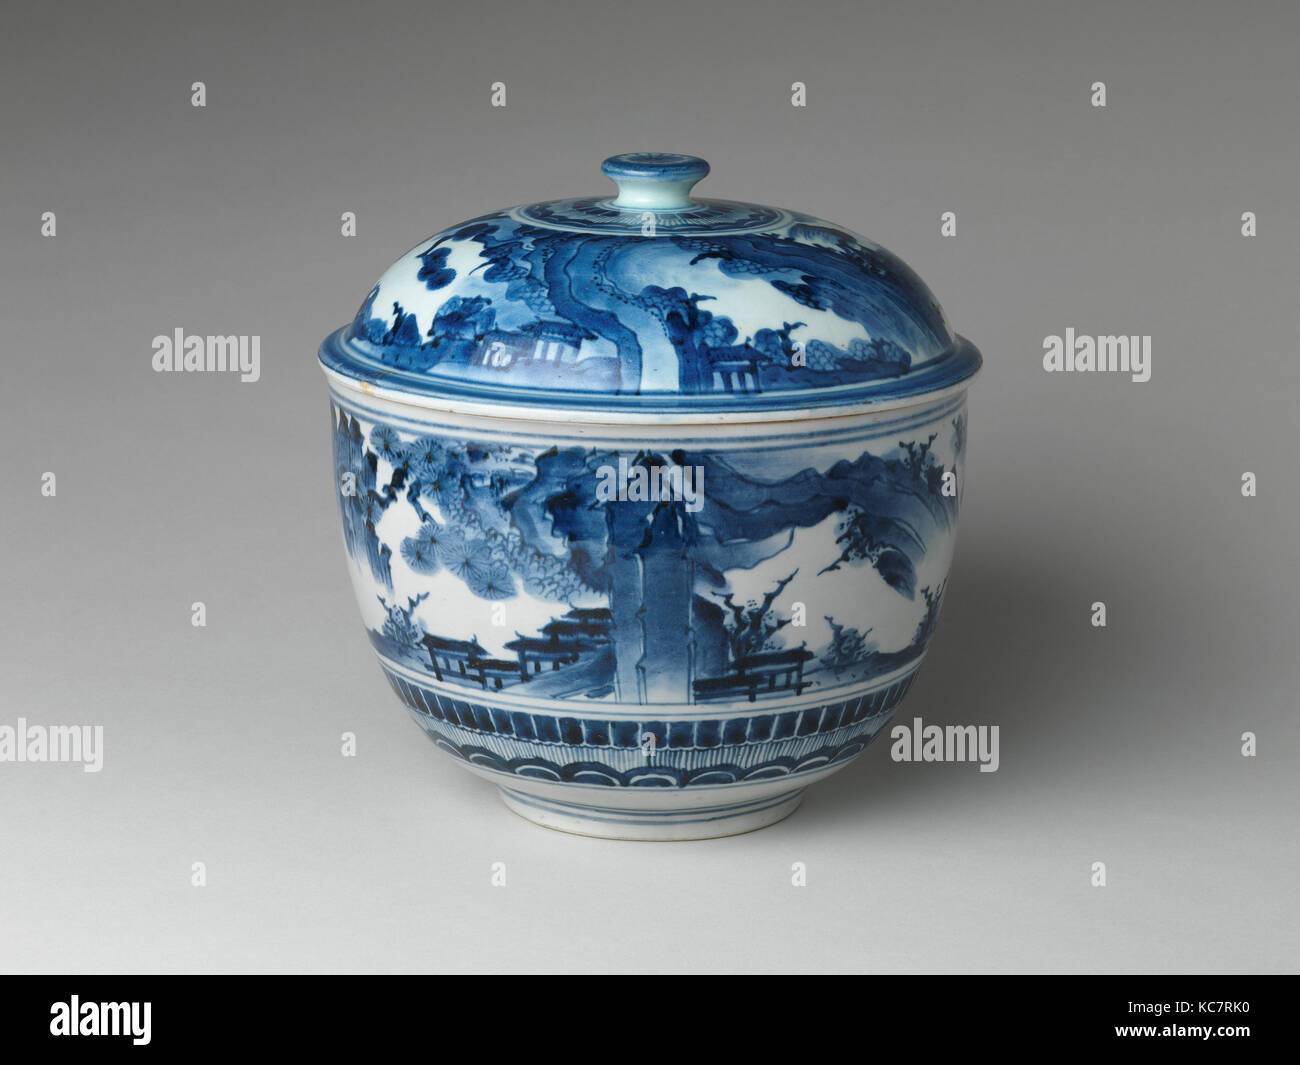 Tureen with Landscape, Edo period (1615–1868), late 17th century, Japan, Porcelain painted with cobalt blue under transparent Stock Photo